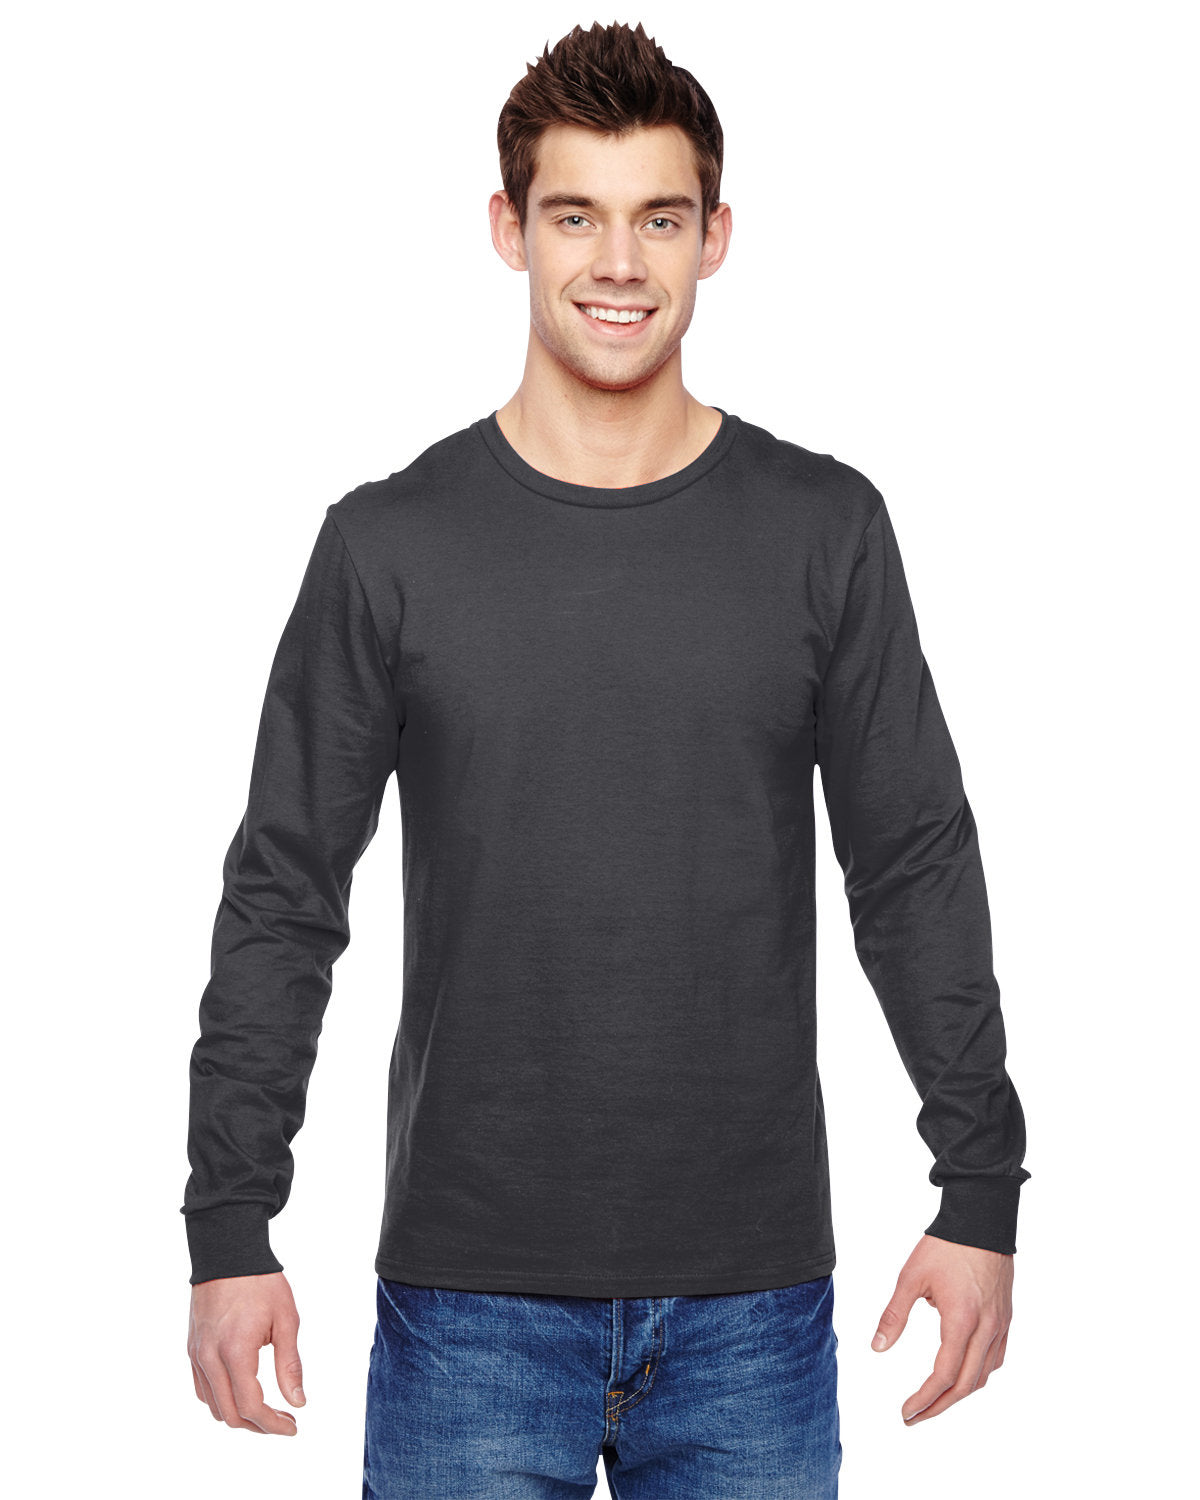 Fruit of the Loom Adult SofSpunÂ® Jersey Long-Sleeve T-Shirt: Your Comfortable Style Companion